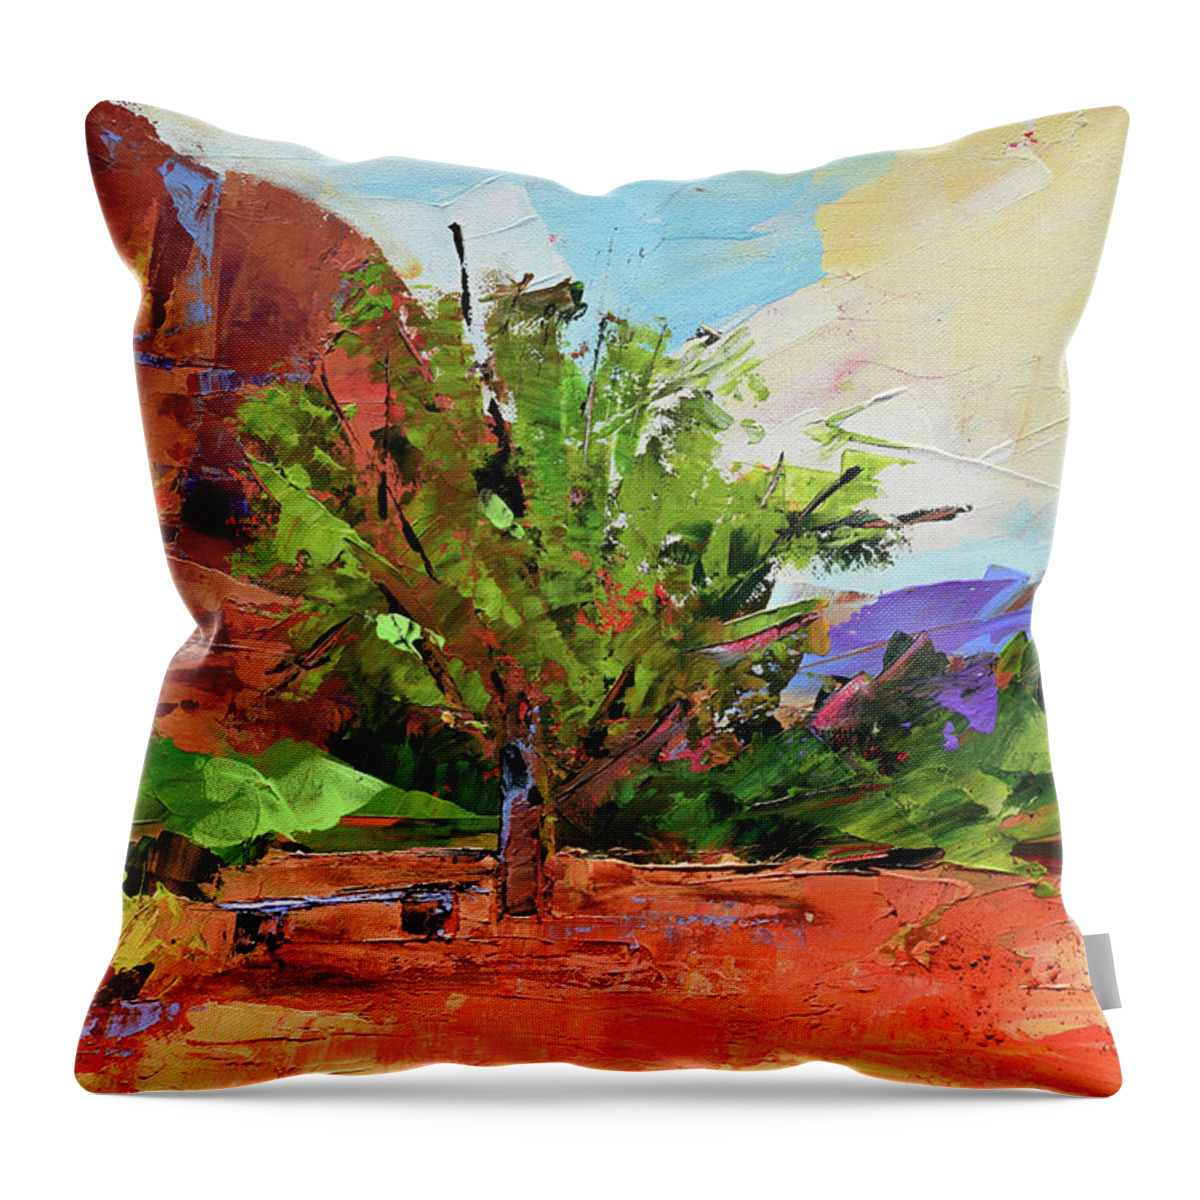 Sedona Throw Pillow featuring the painting Sedona Pathway by Elise Palmigiani